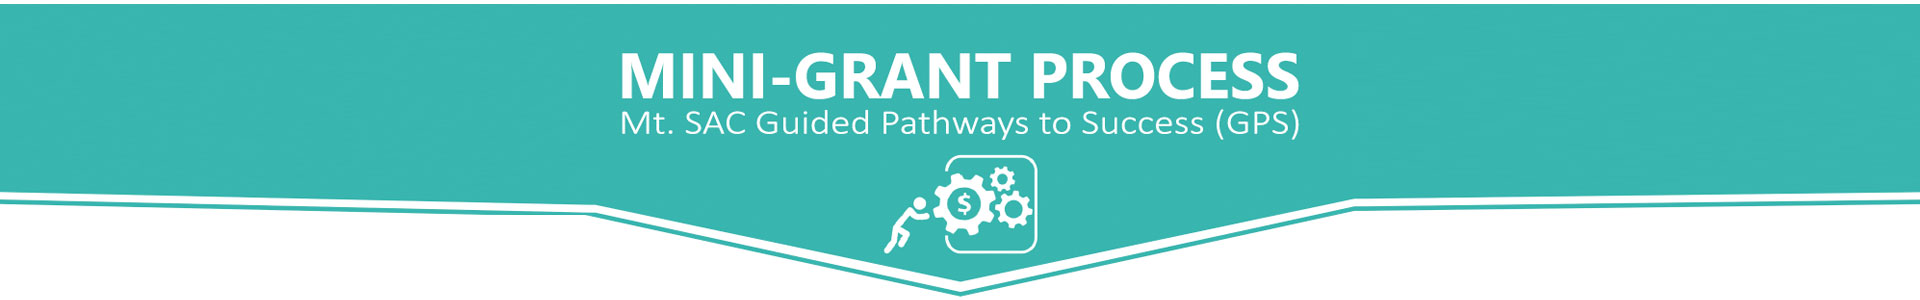 Mini Grant Process Guided Pathways to Success